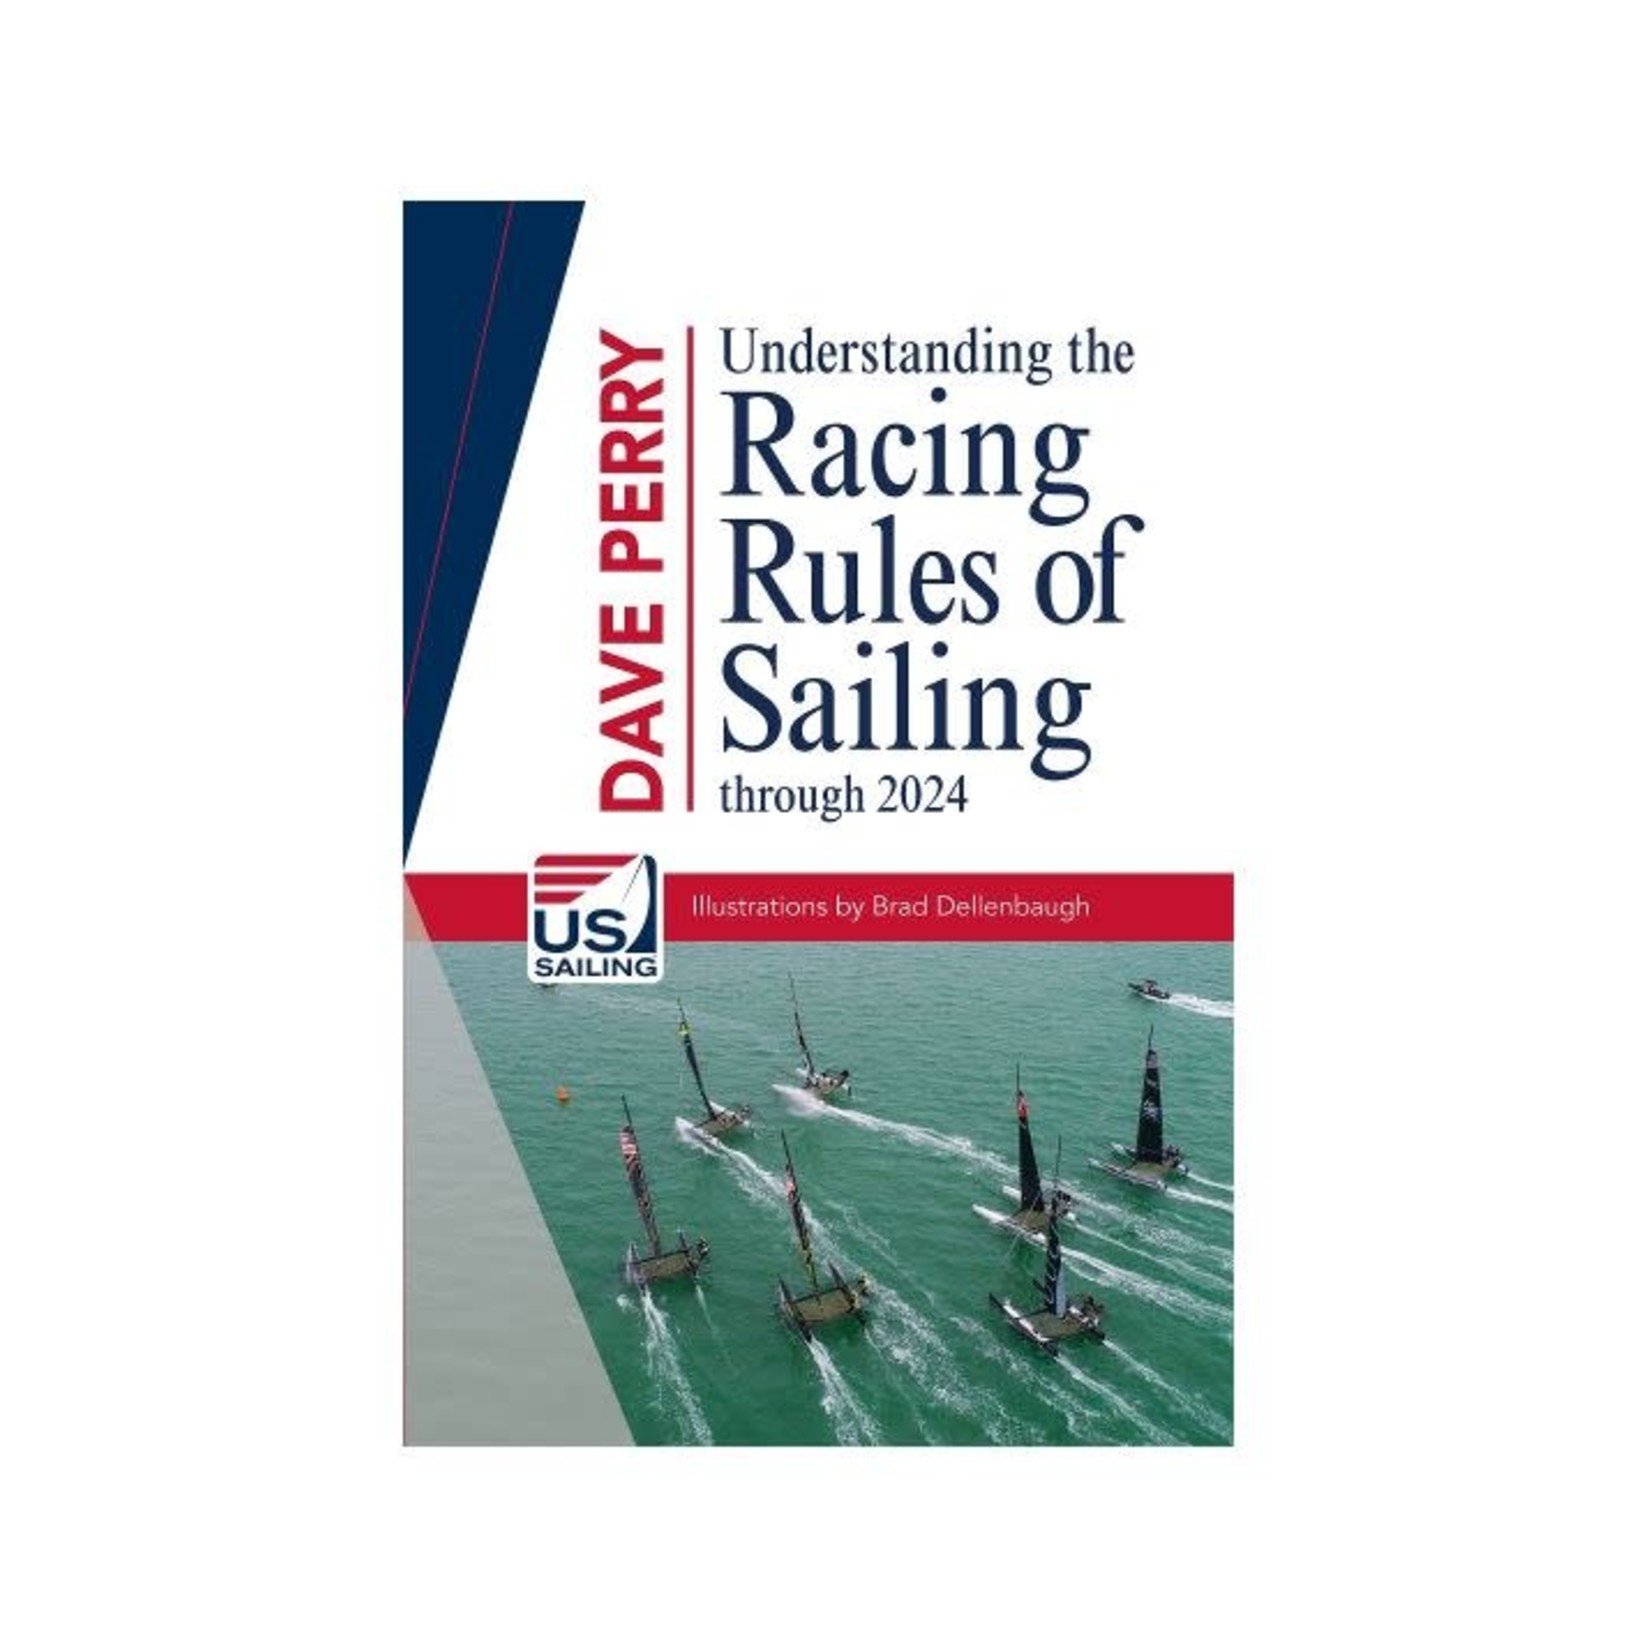 TEXT Understanding the Racing Rules of Sailing through 2024